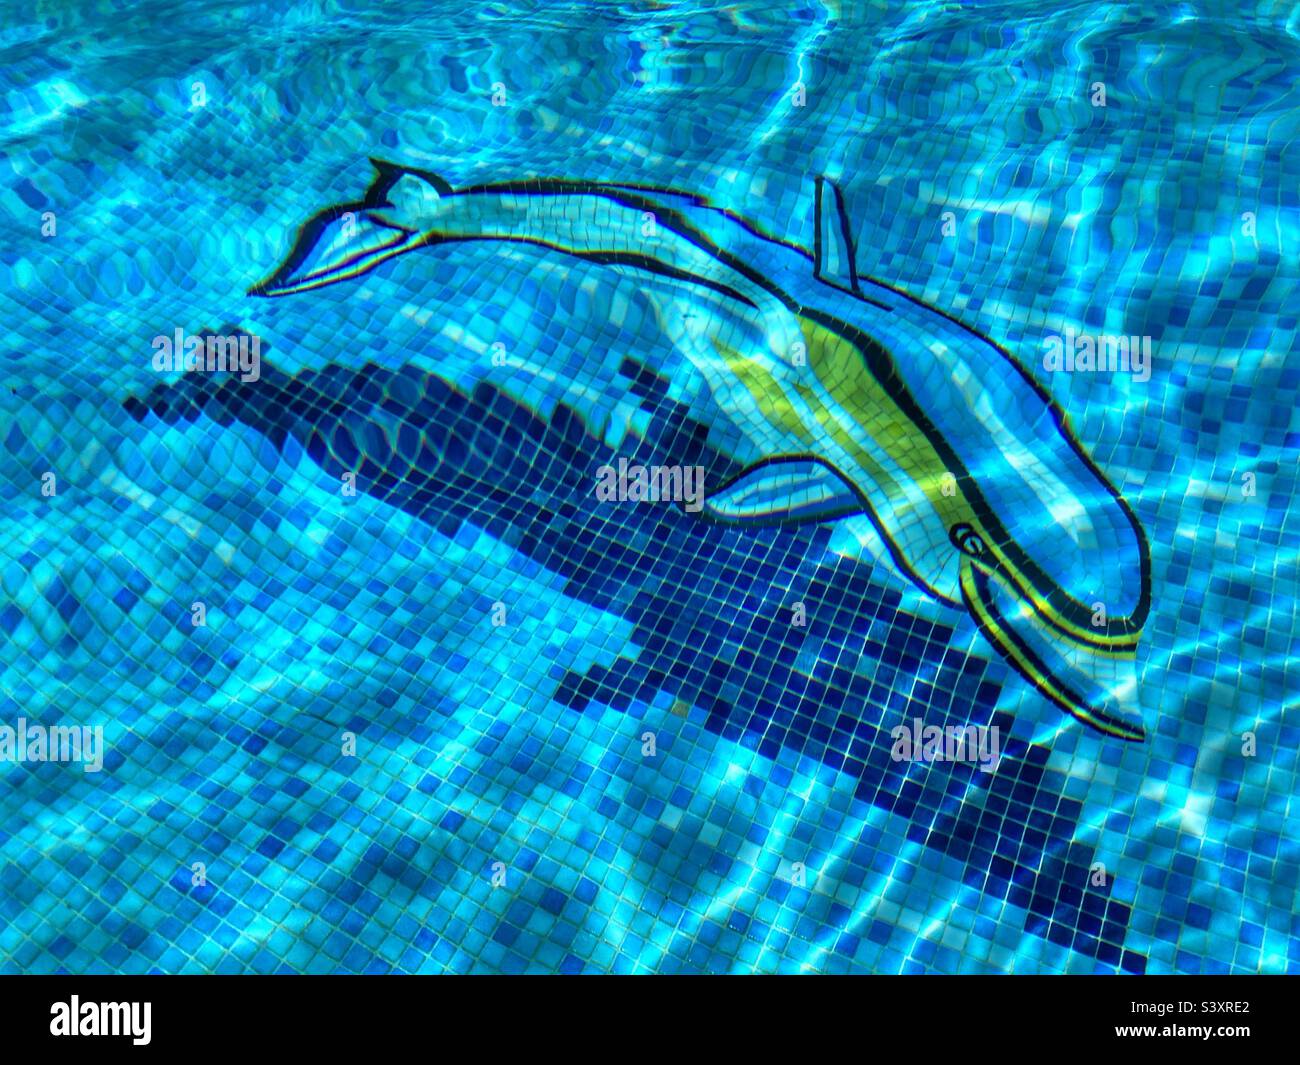 Dolphin mosaic in swimming pool Stock Photo